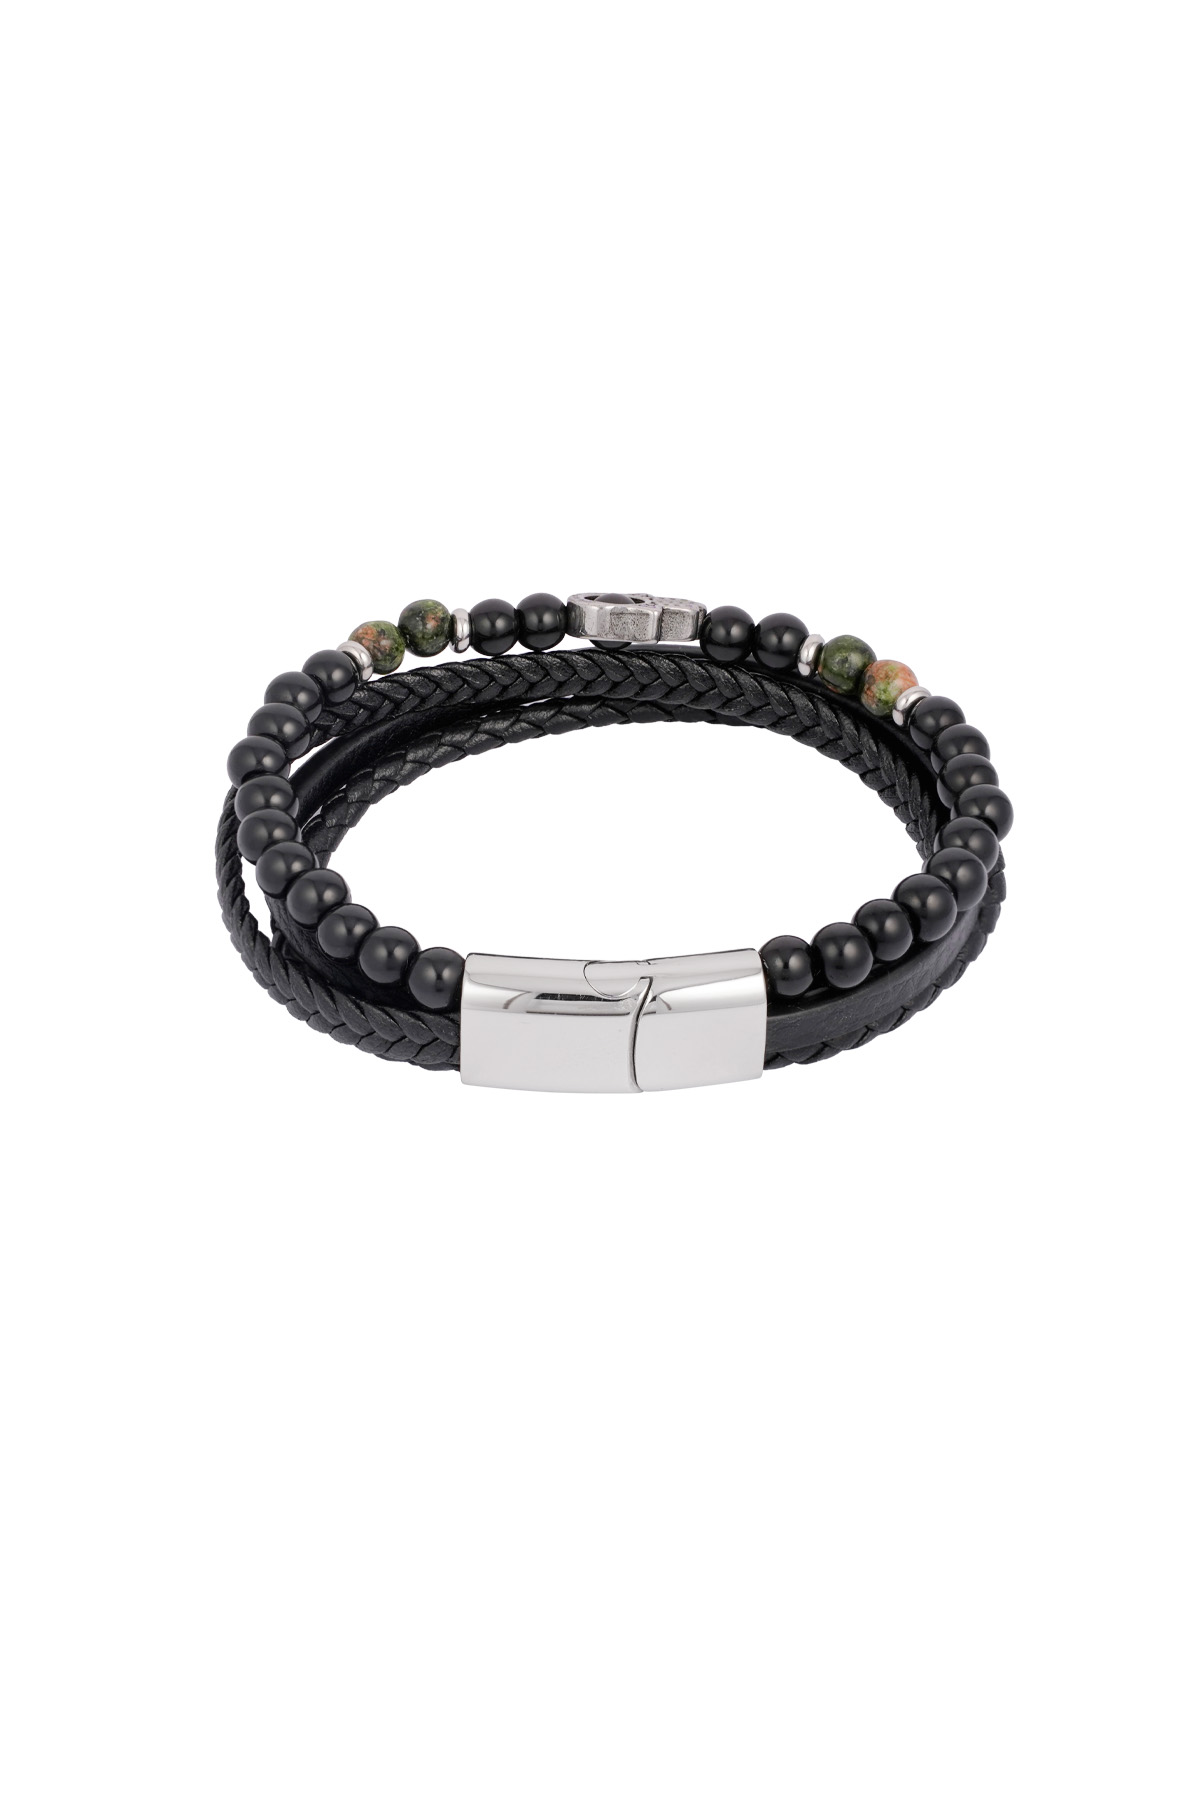 Double men's bracelet with hand charm - Brown Black Picture5